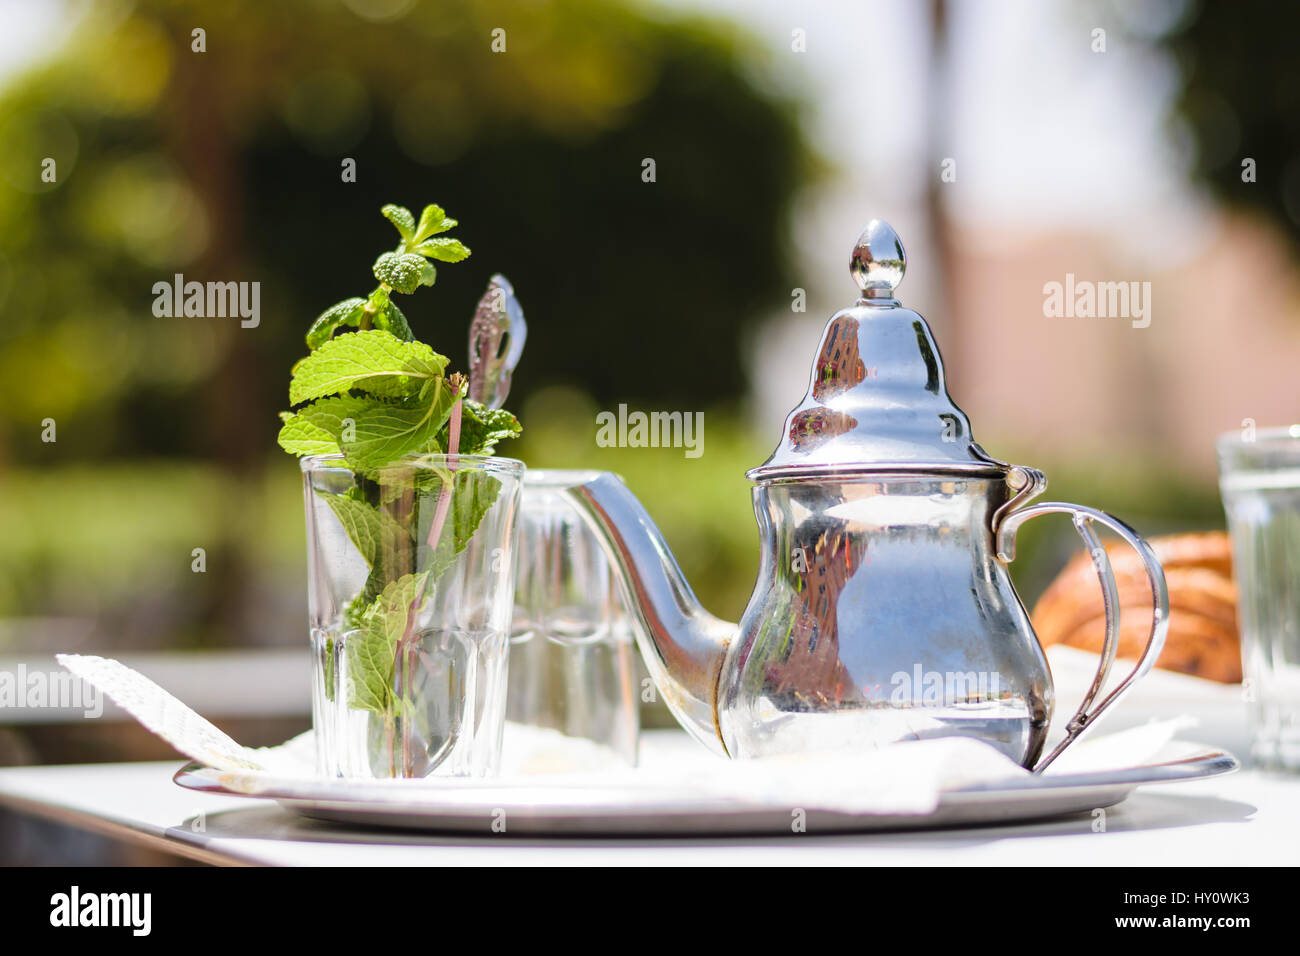 Teapot and glass with mint leaves, Morocco Stock Photo